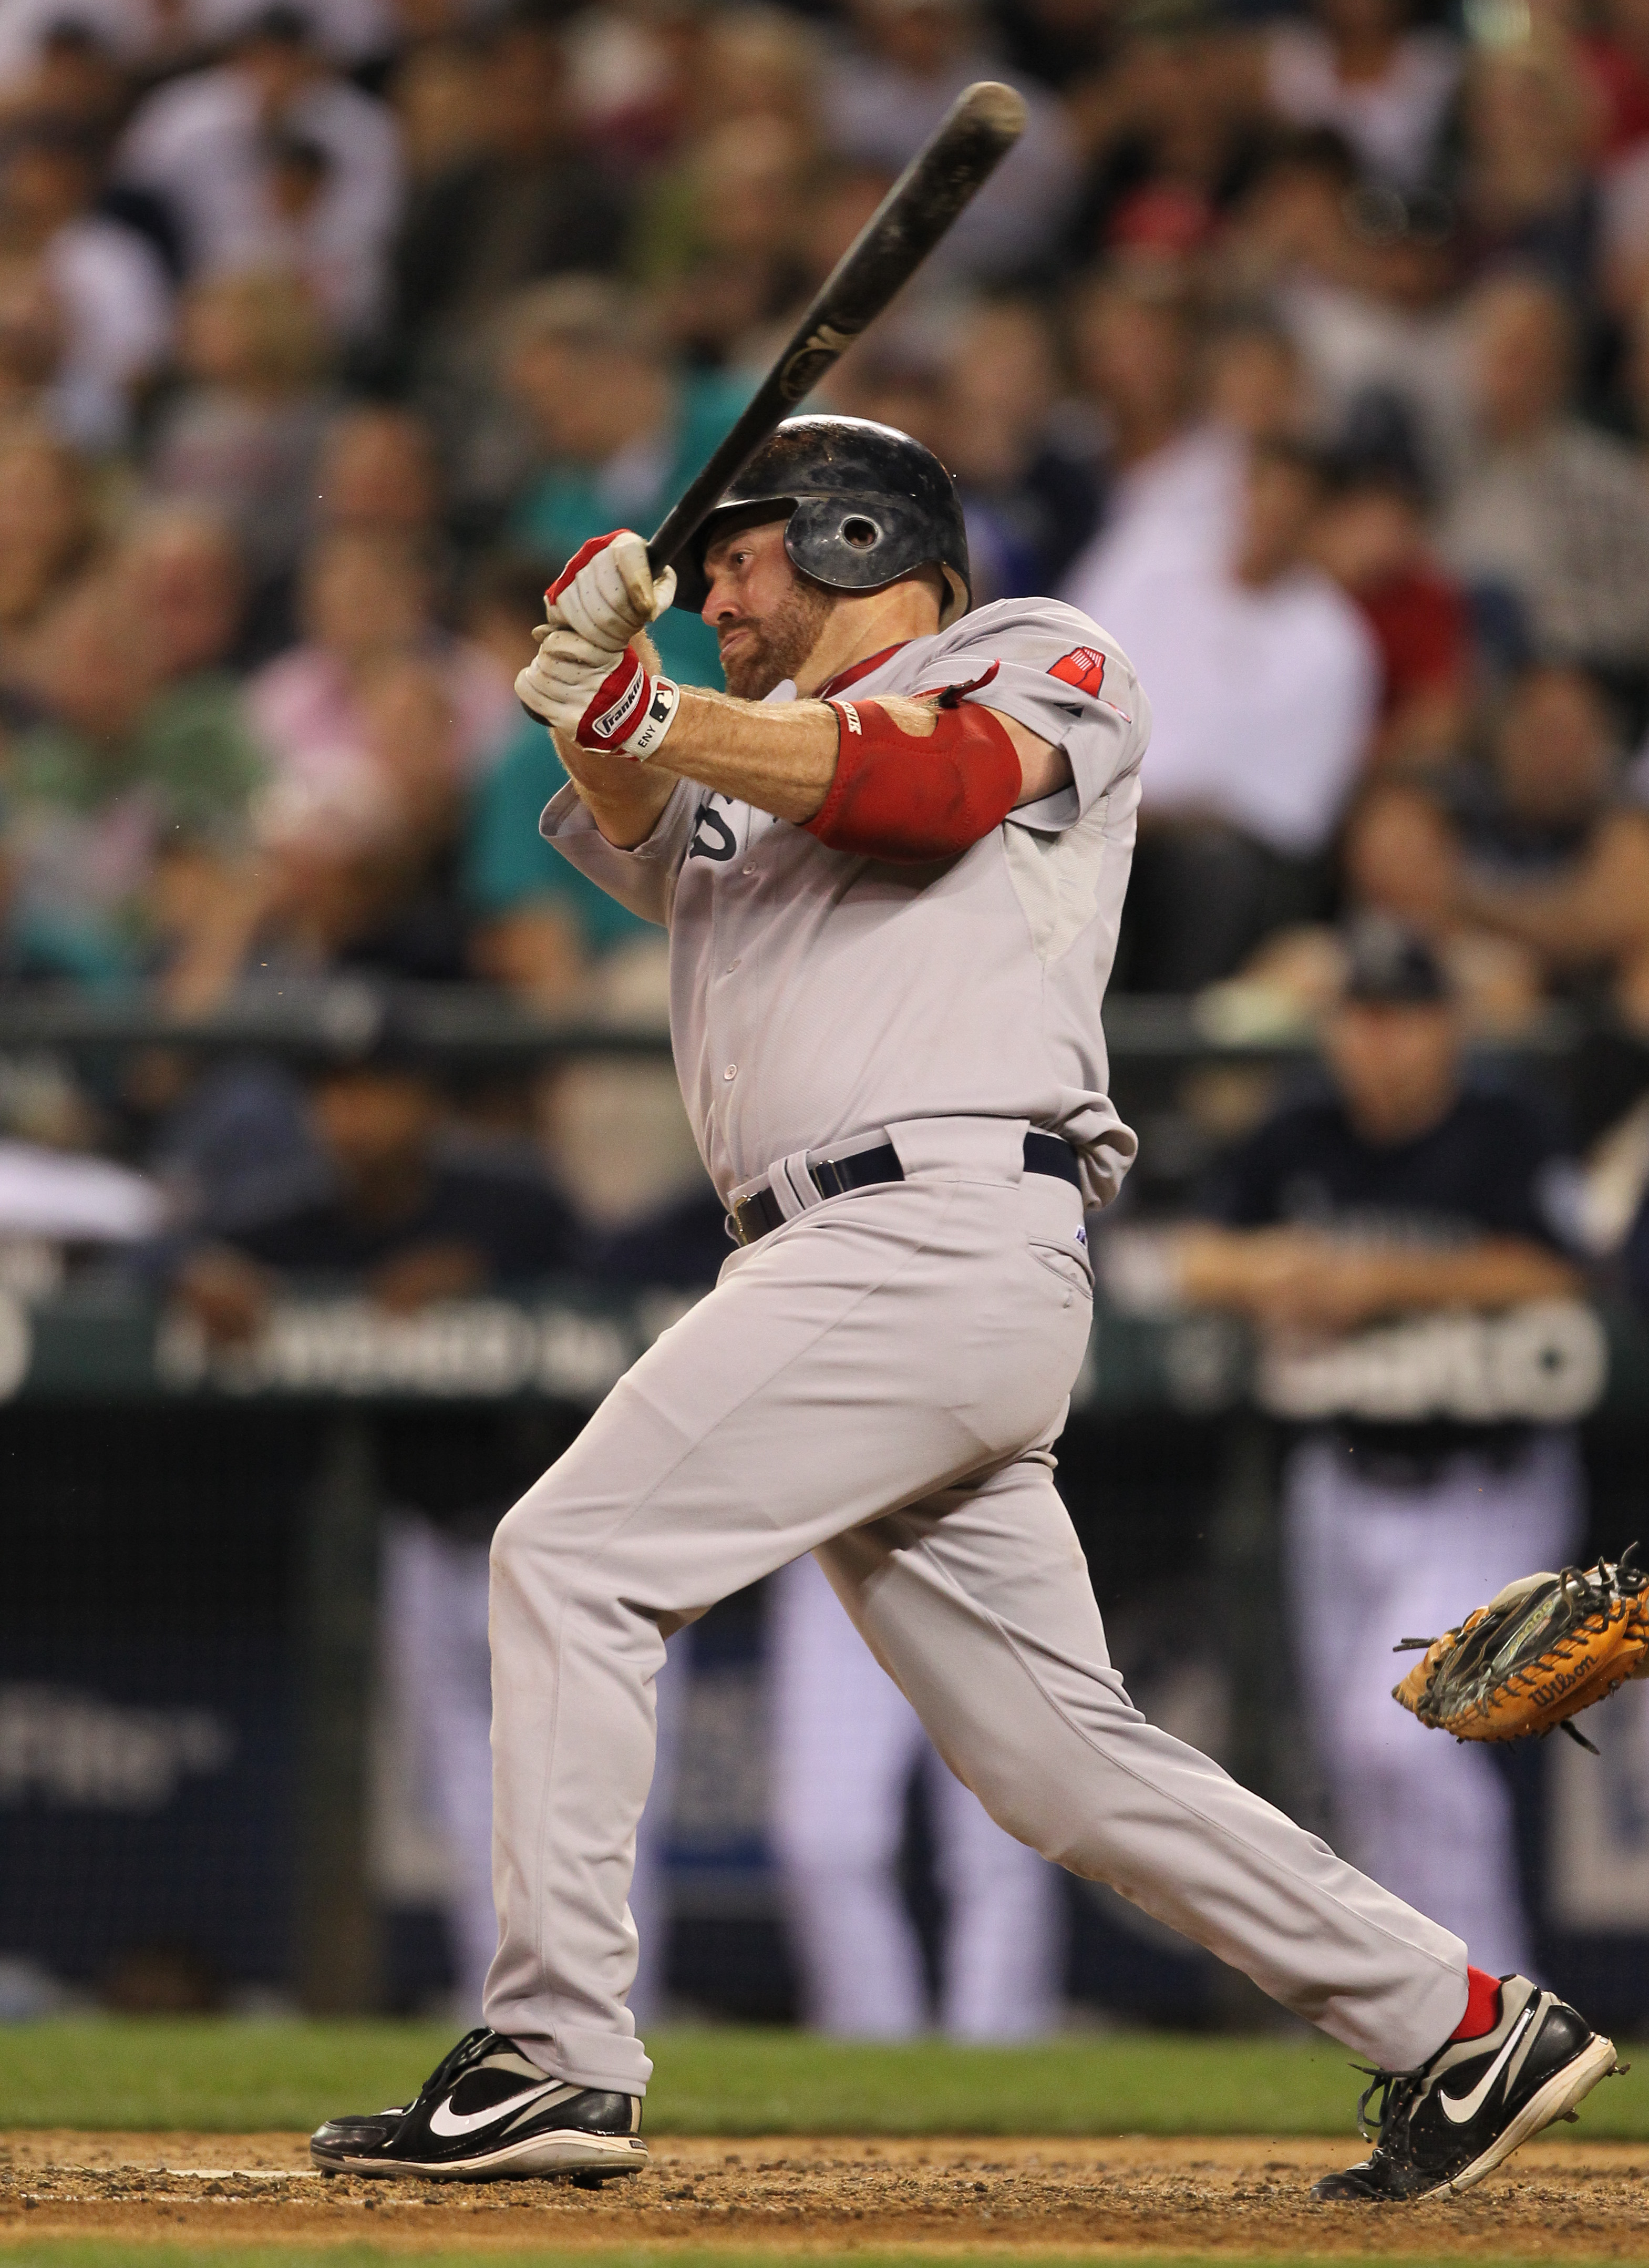 RED SOX: Kevin Youkilis powers Boston past Chicago Cubs